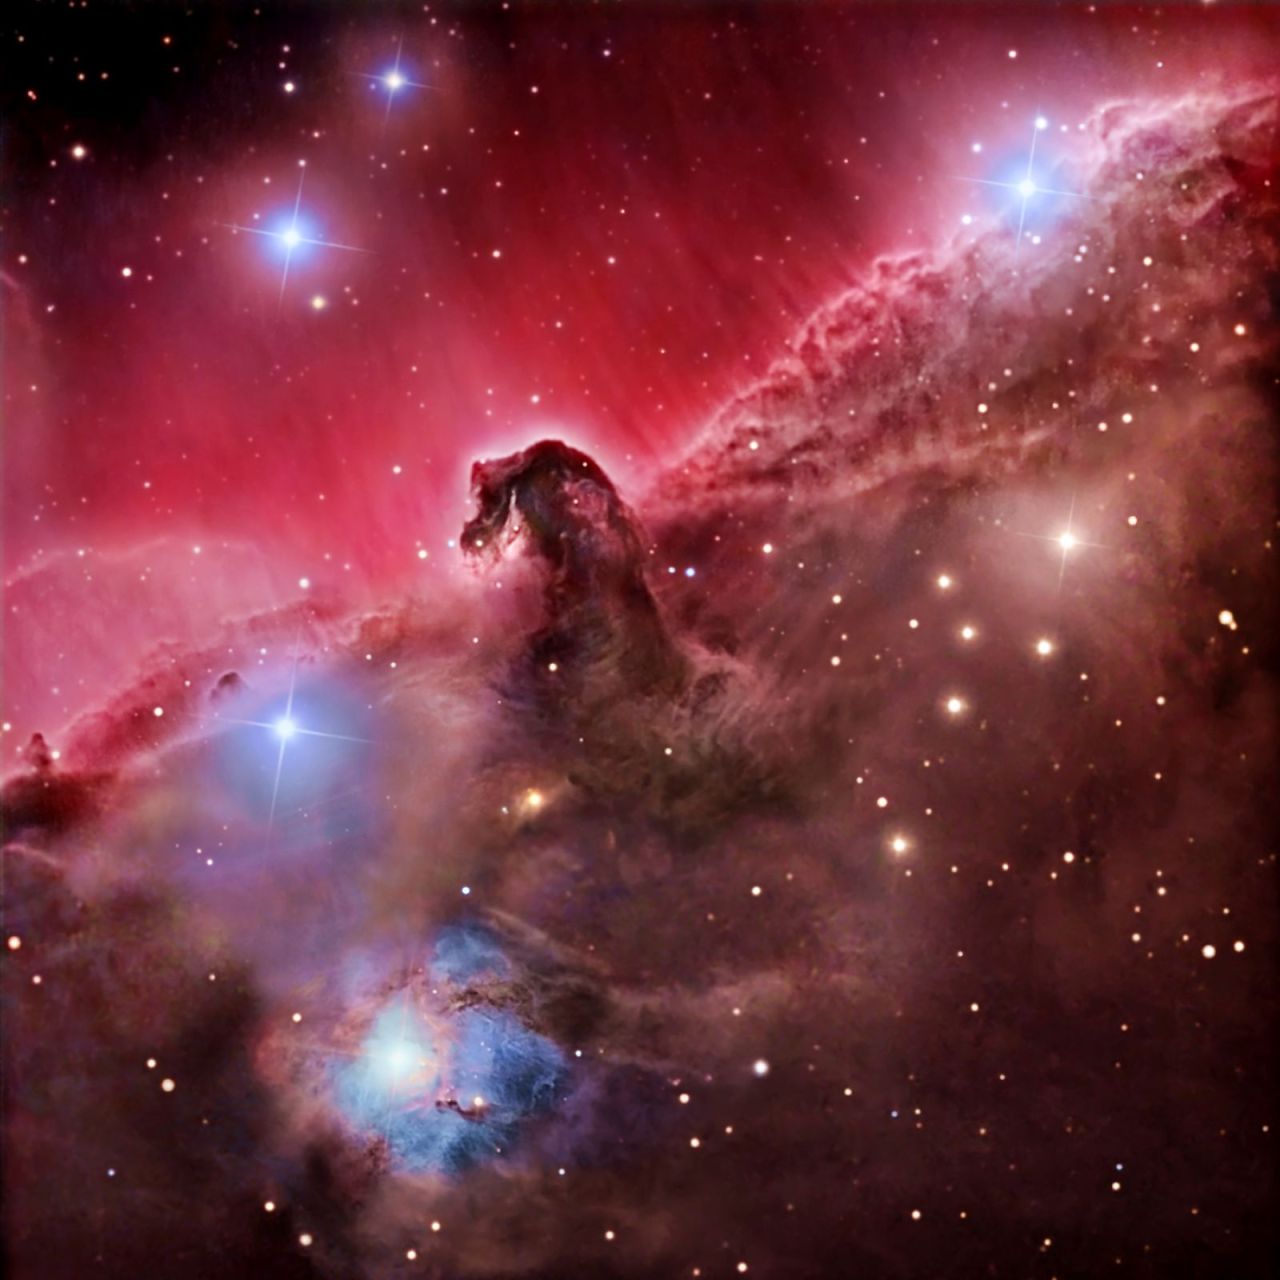 Horsehead Nebula & blue reflection nebula NGC 2023 in the constellation Orion